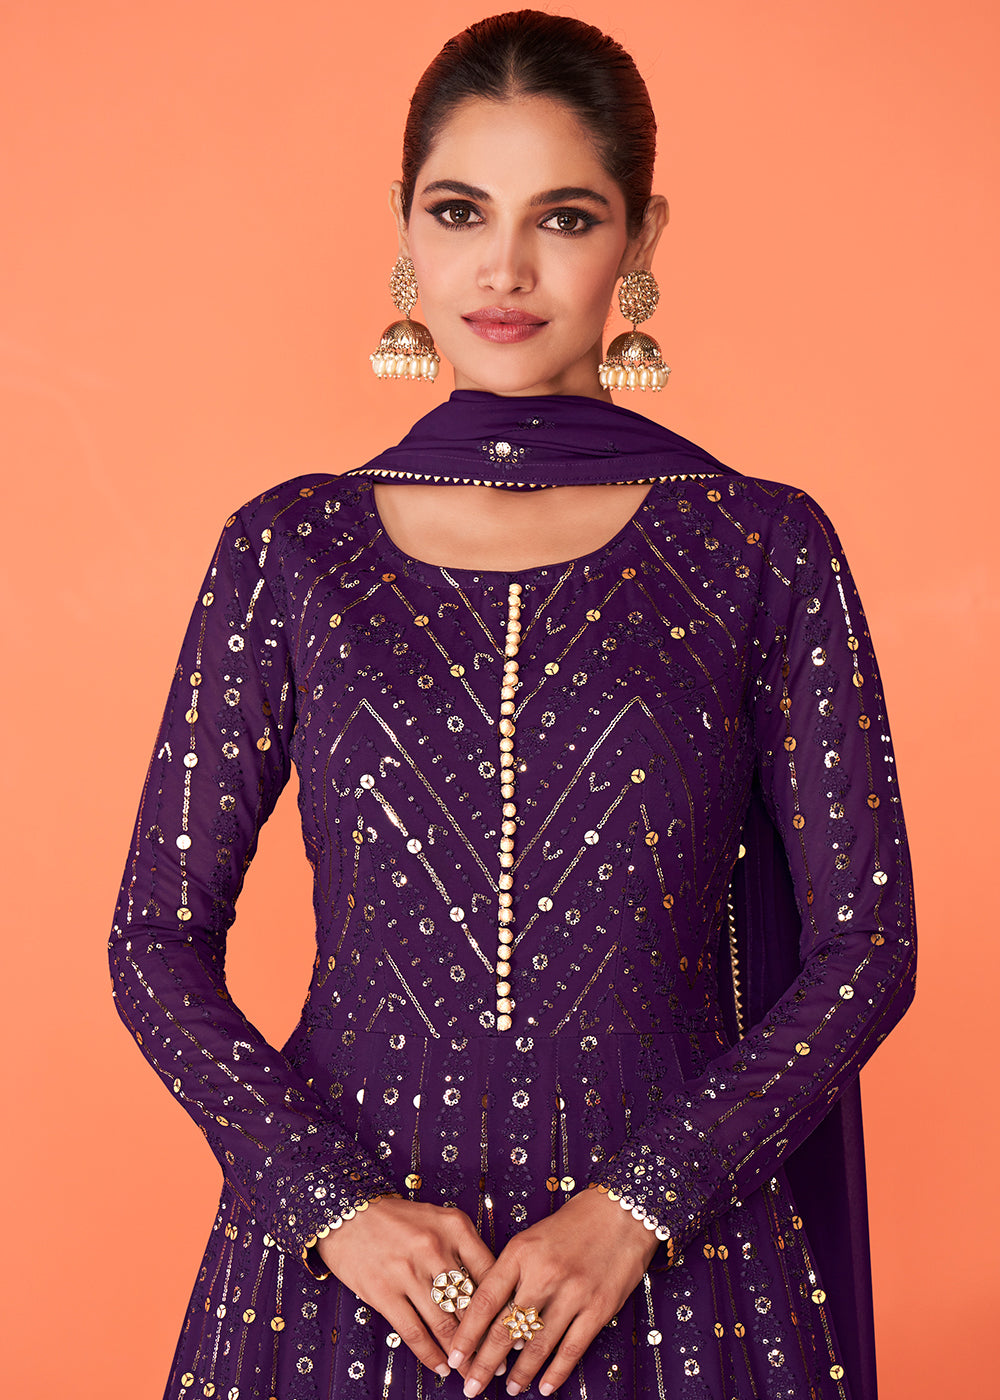 Shop Now Exceptional Purple Georgette Festive Anarkali Suit Online featuring Vartika Singh at Empress Clothing in USA. 